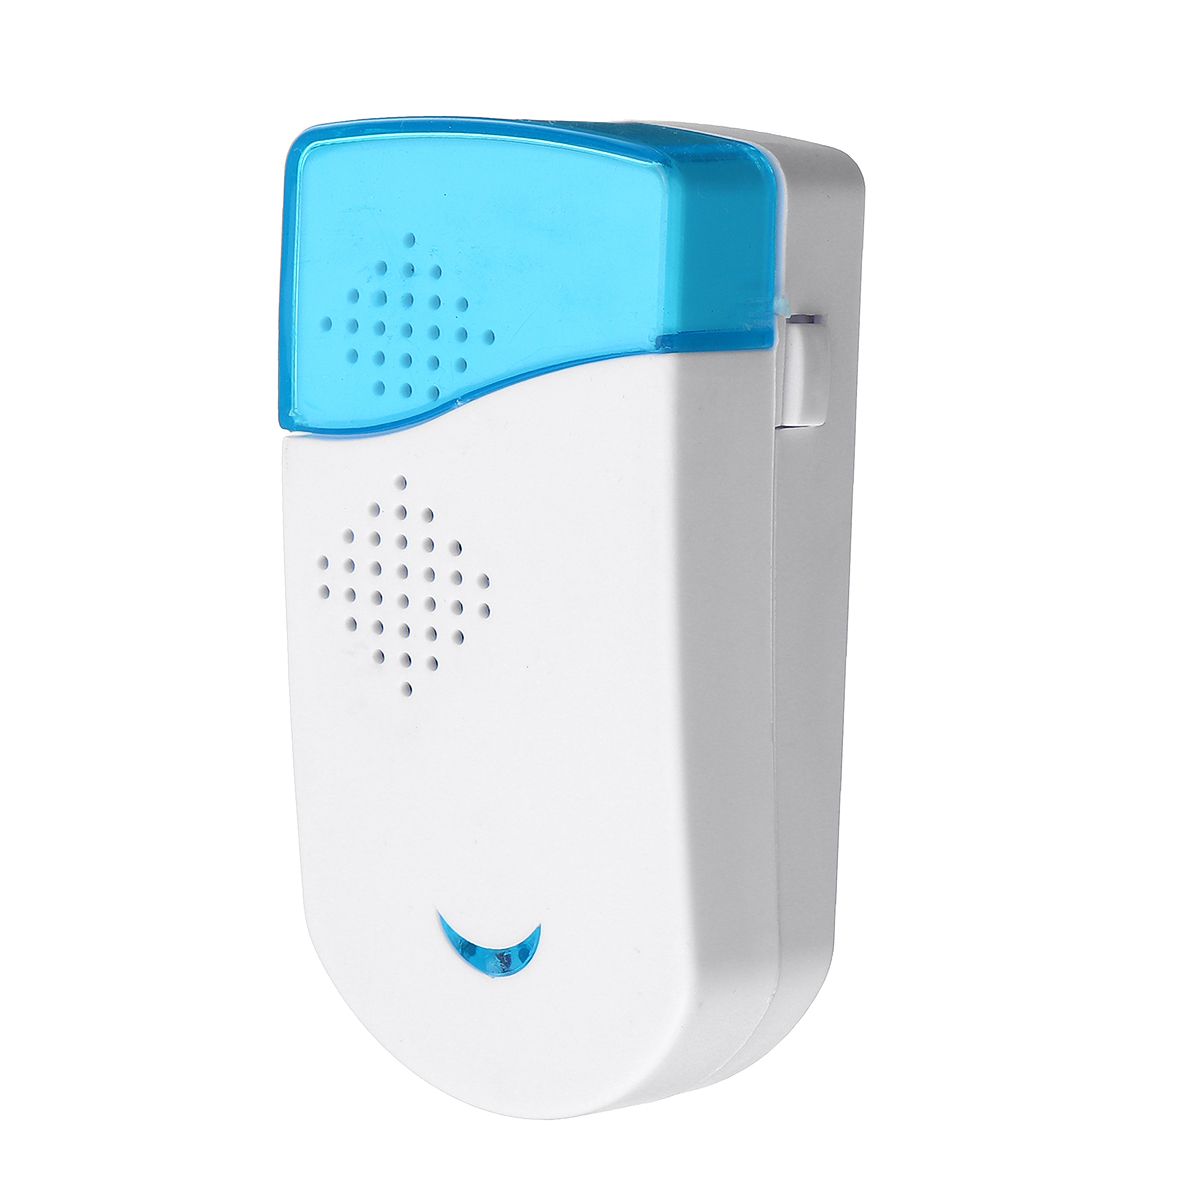 Wireless-Remote-Control-36-Tune-Songs-Smart-Doorbell-Self-adhesive-Rings-Transmitter--Receiver-1593949